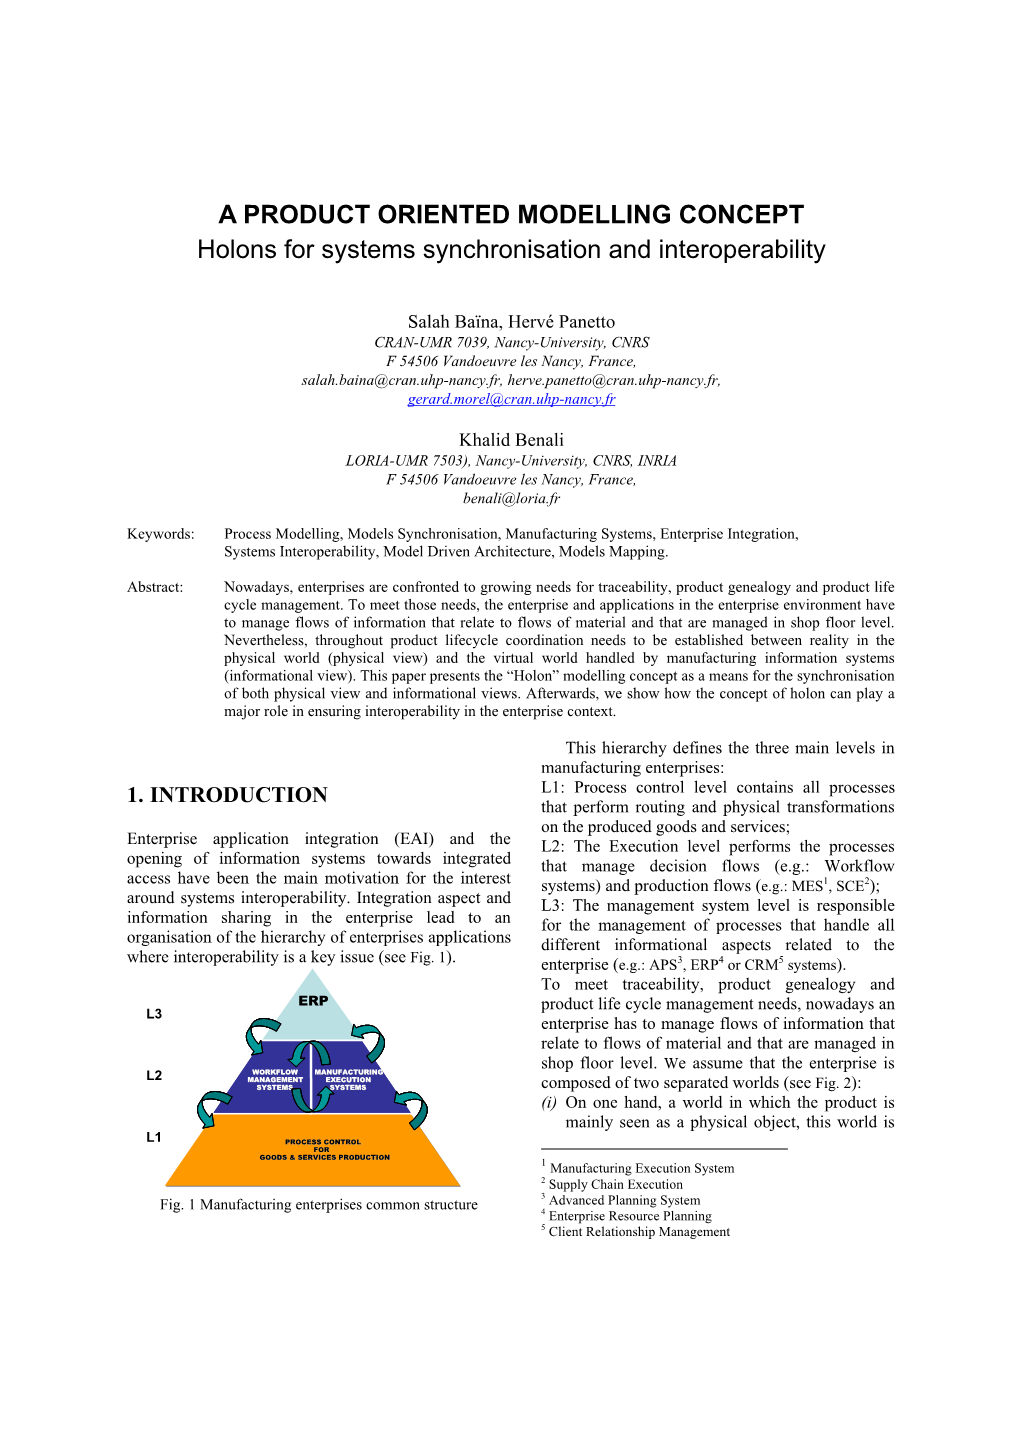 A PRODUCT ORIENTED MODELLING CONCEPT Holons for Systems Synchronisation and Interoperability